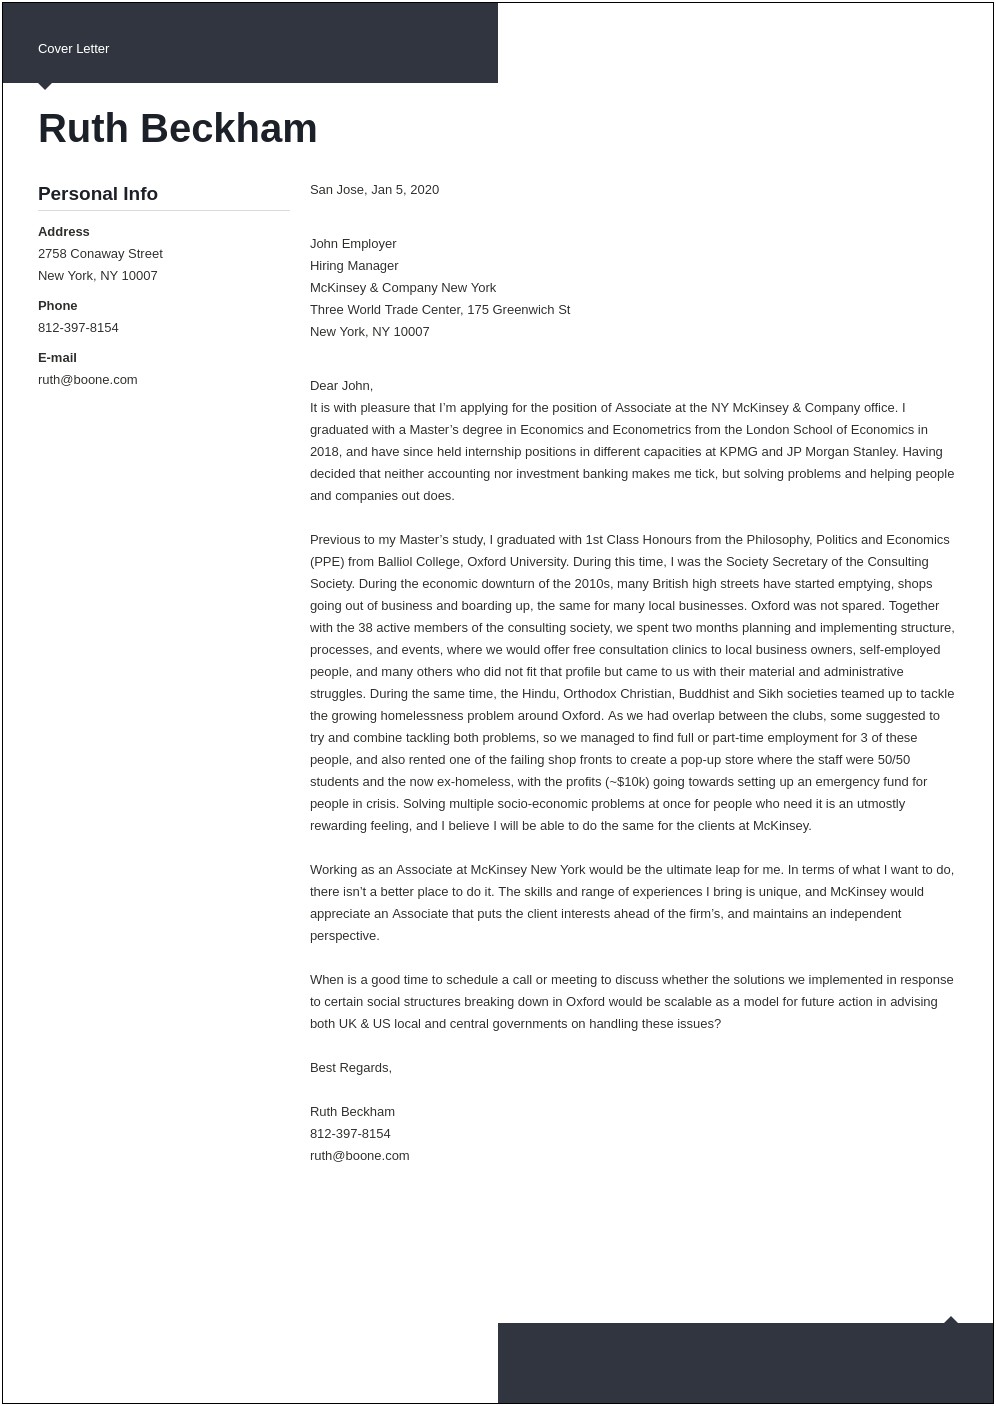 Example Resume Cover Letter For Executive Position